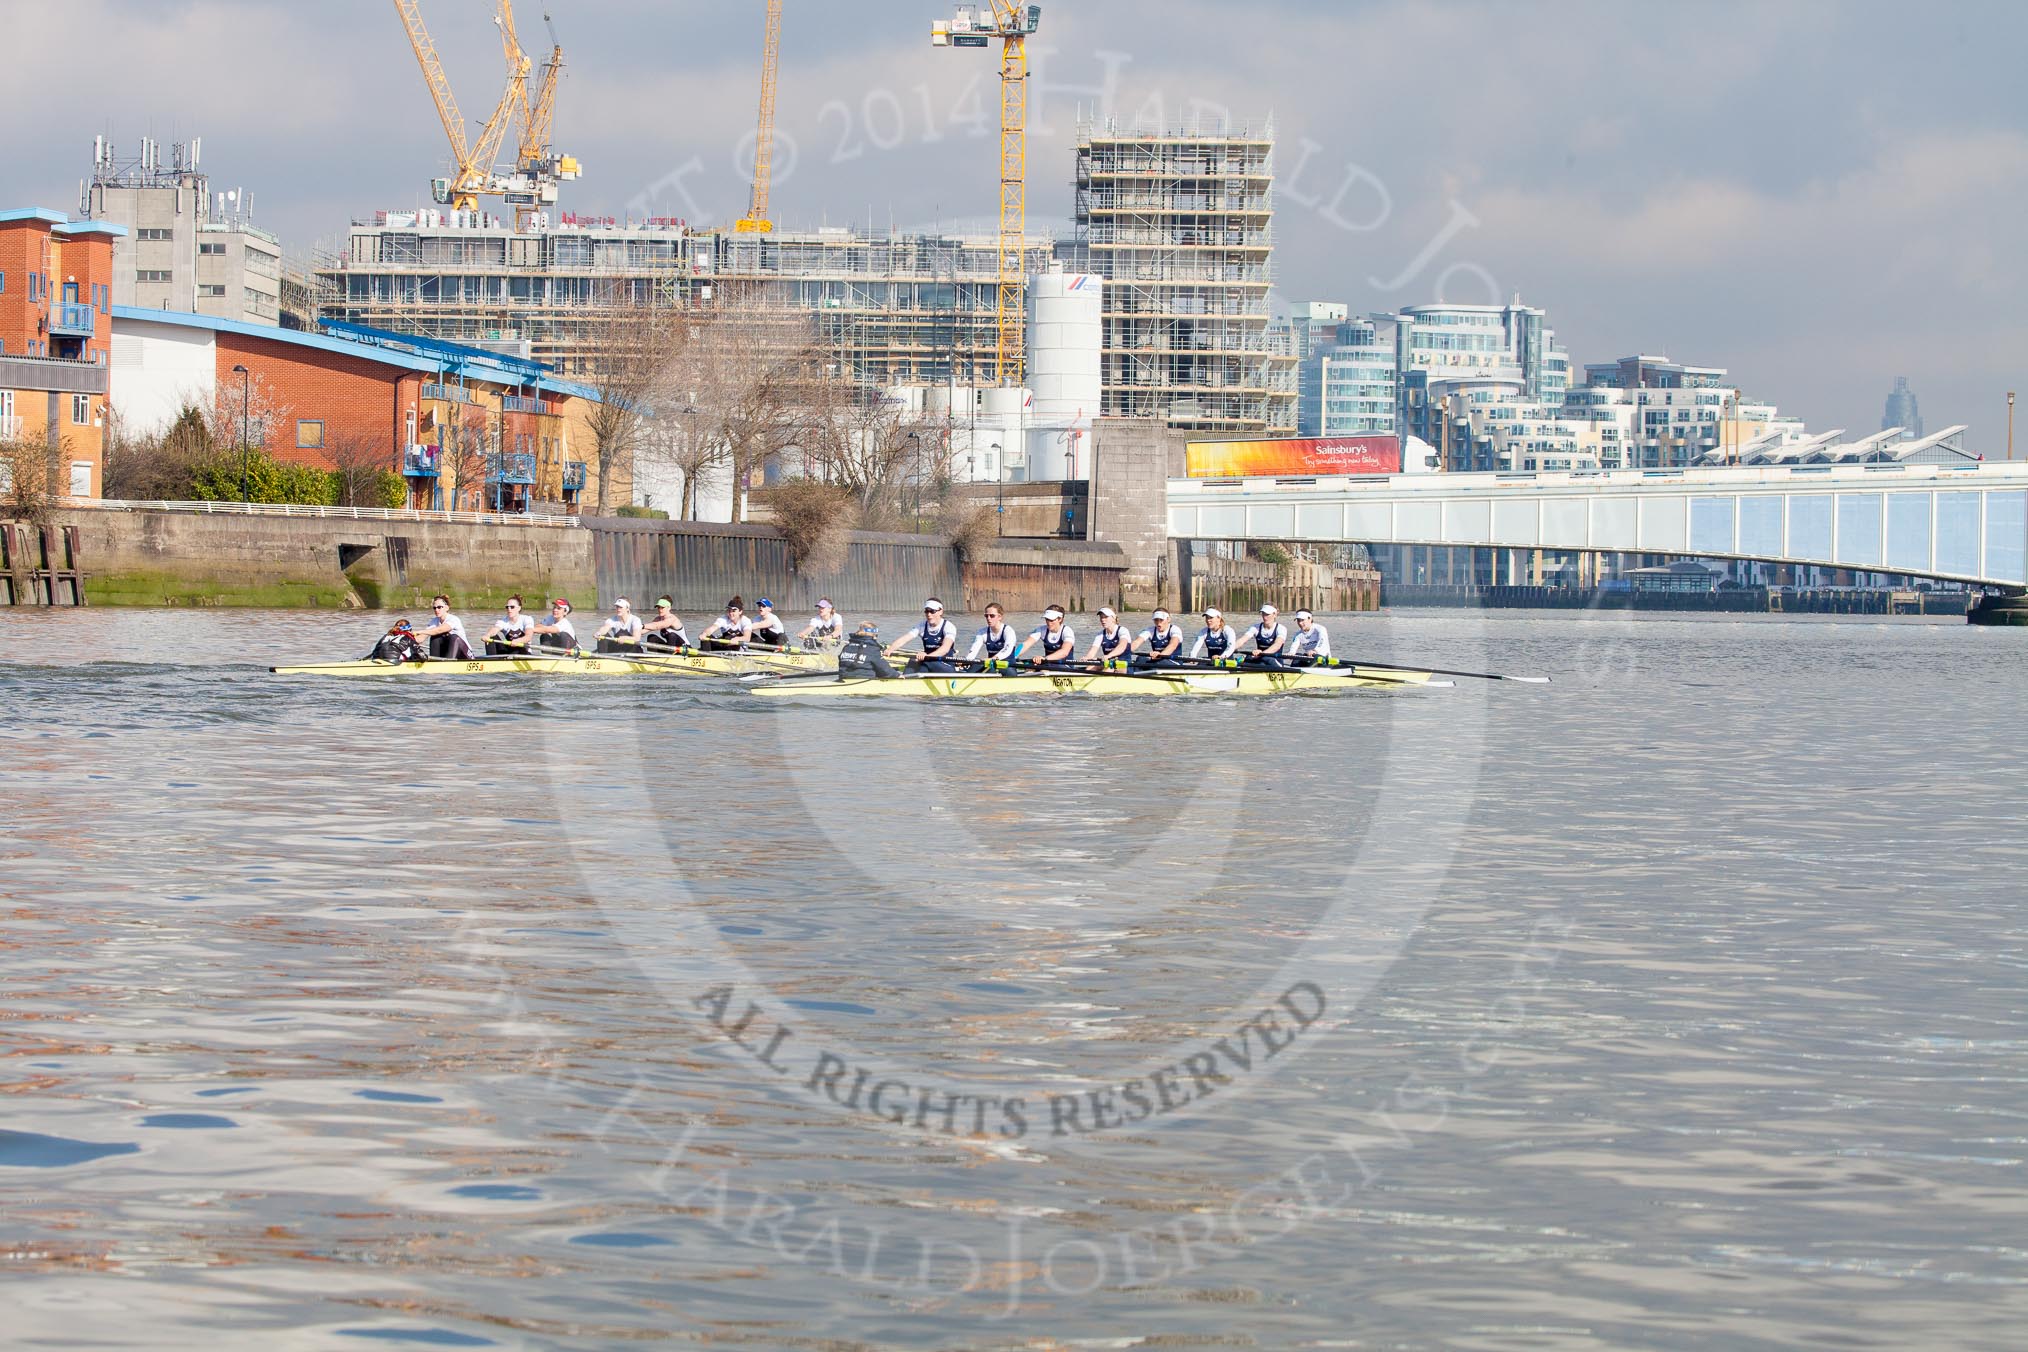 The Boat Race season 2014 - fixture OUWBC vs Molesey BC.




on 01 March 2014 at 13:09, image #181